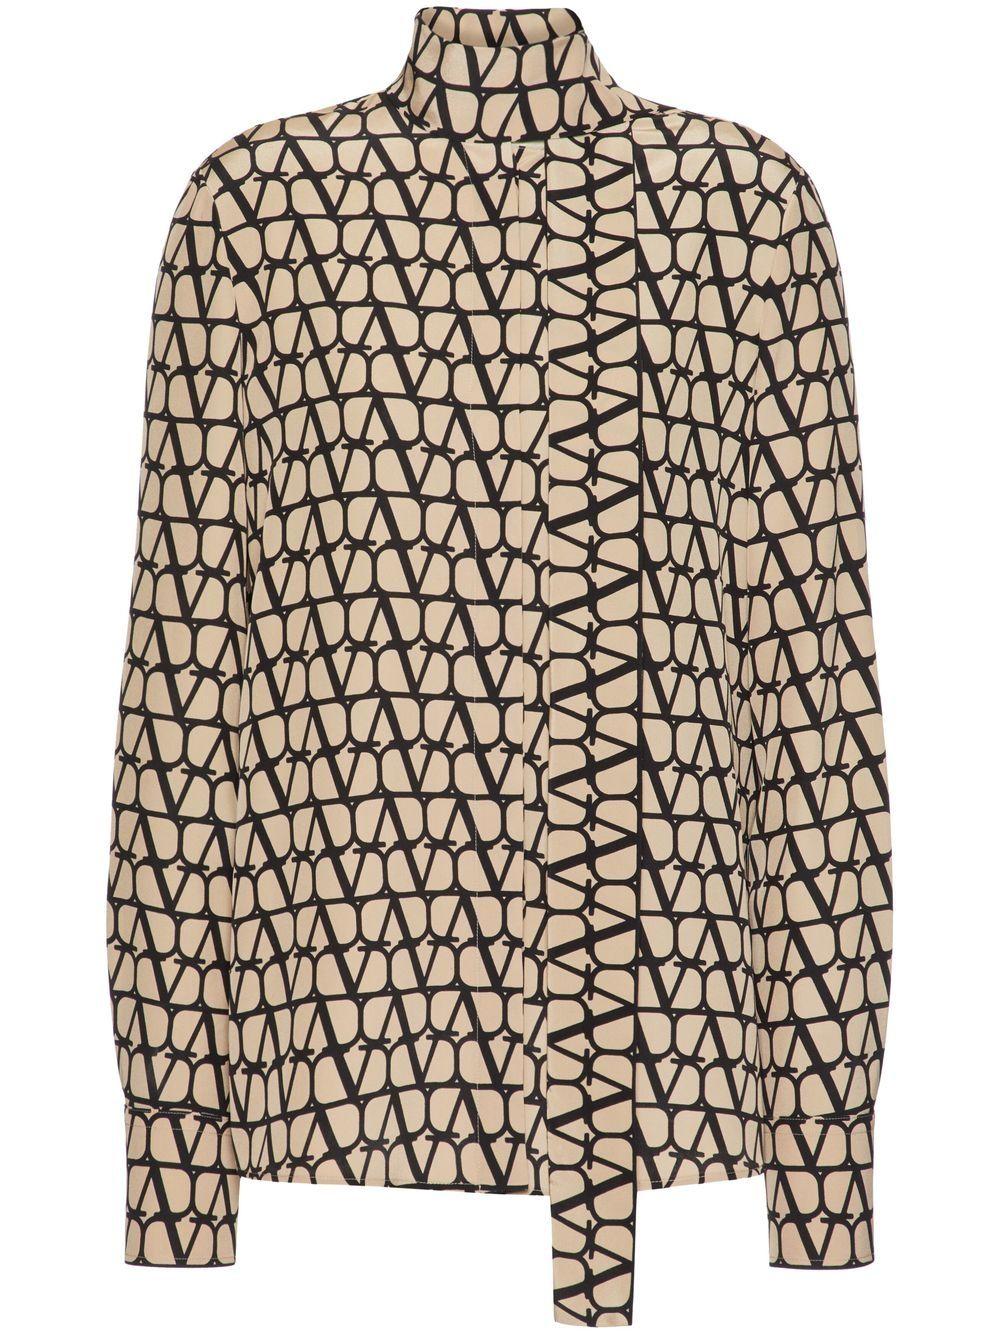 VALENTINO Beige and Black Striped Shirt for Women - SS23 Collection